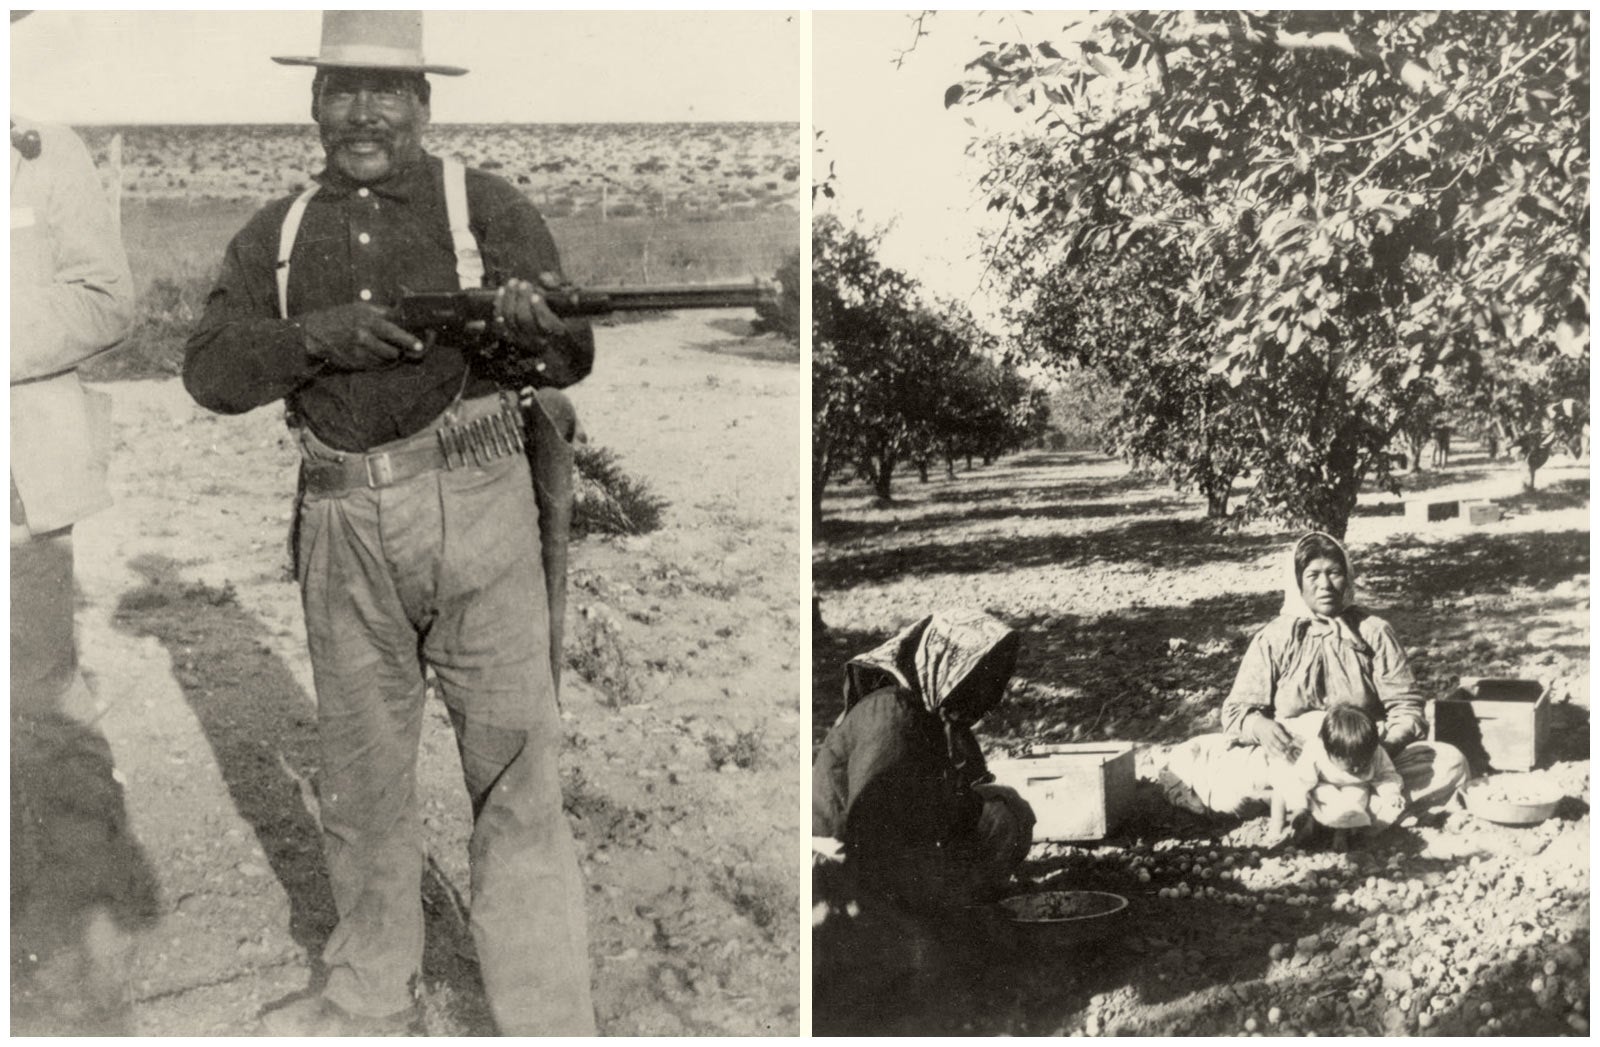 Trafzer’s book maintains posse member and tracker Segundo Chino, pictured left, would later declare Willie Boy was not killed by the posse. Chino went on to marry Maria Mike, the widow of William Mike. Maria is pictured right with her daughter, Dorothy, following the deaths of her husband and Carlota. (UCR Library, Harry W. Lawton Collection)